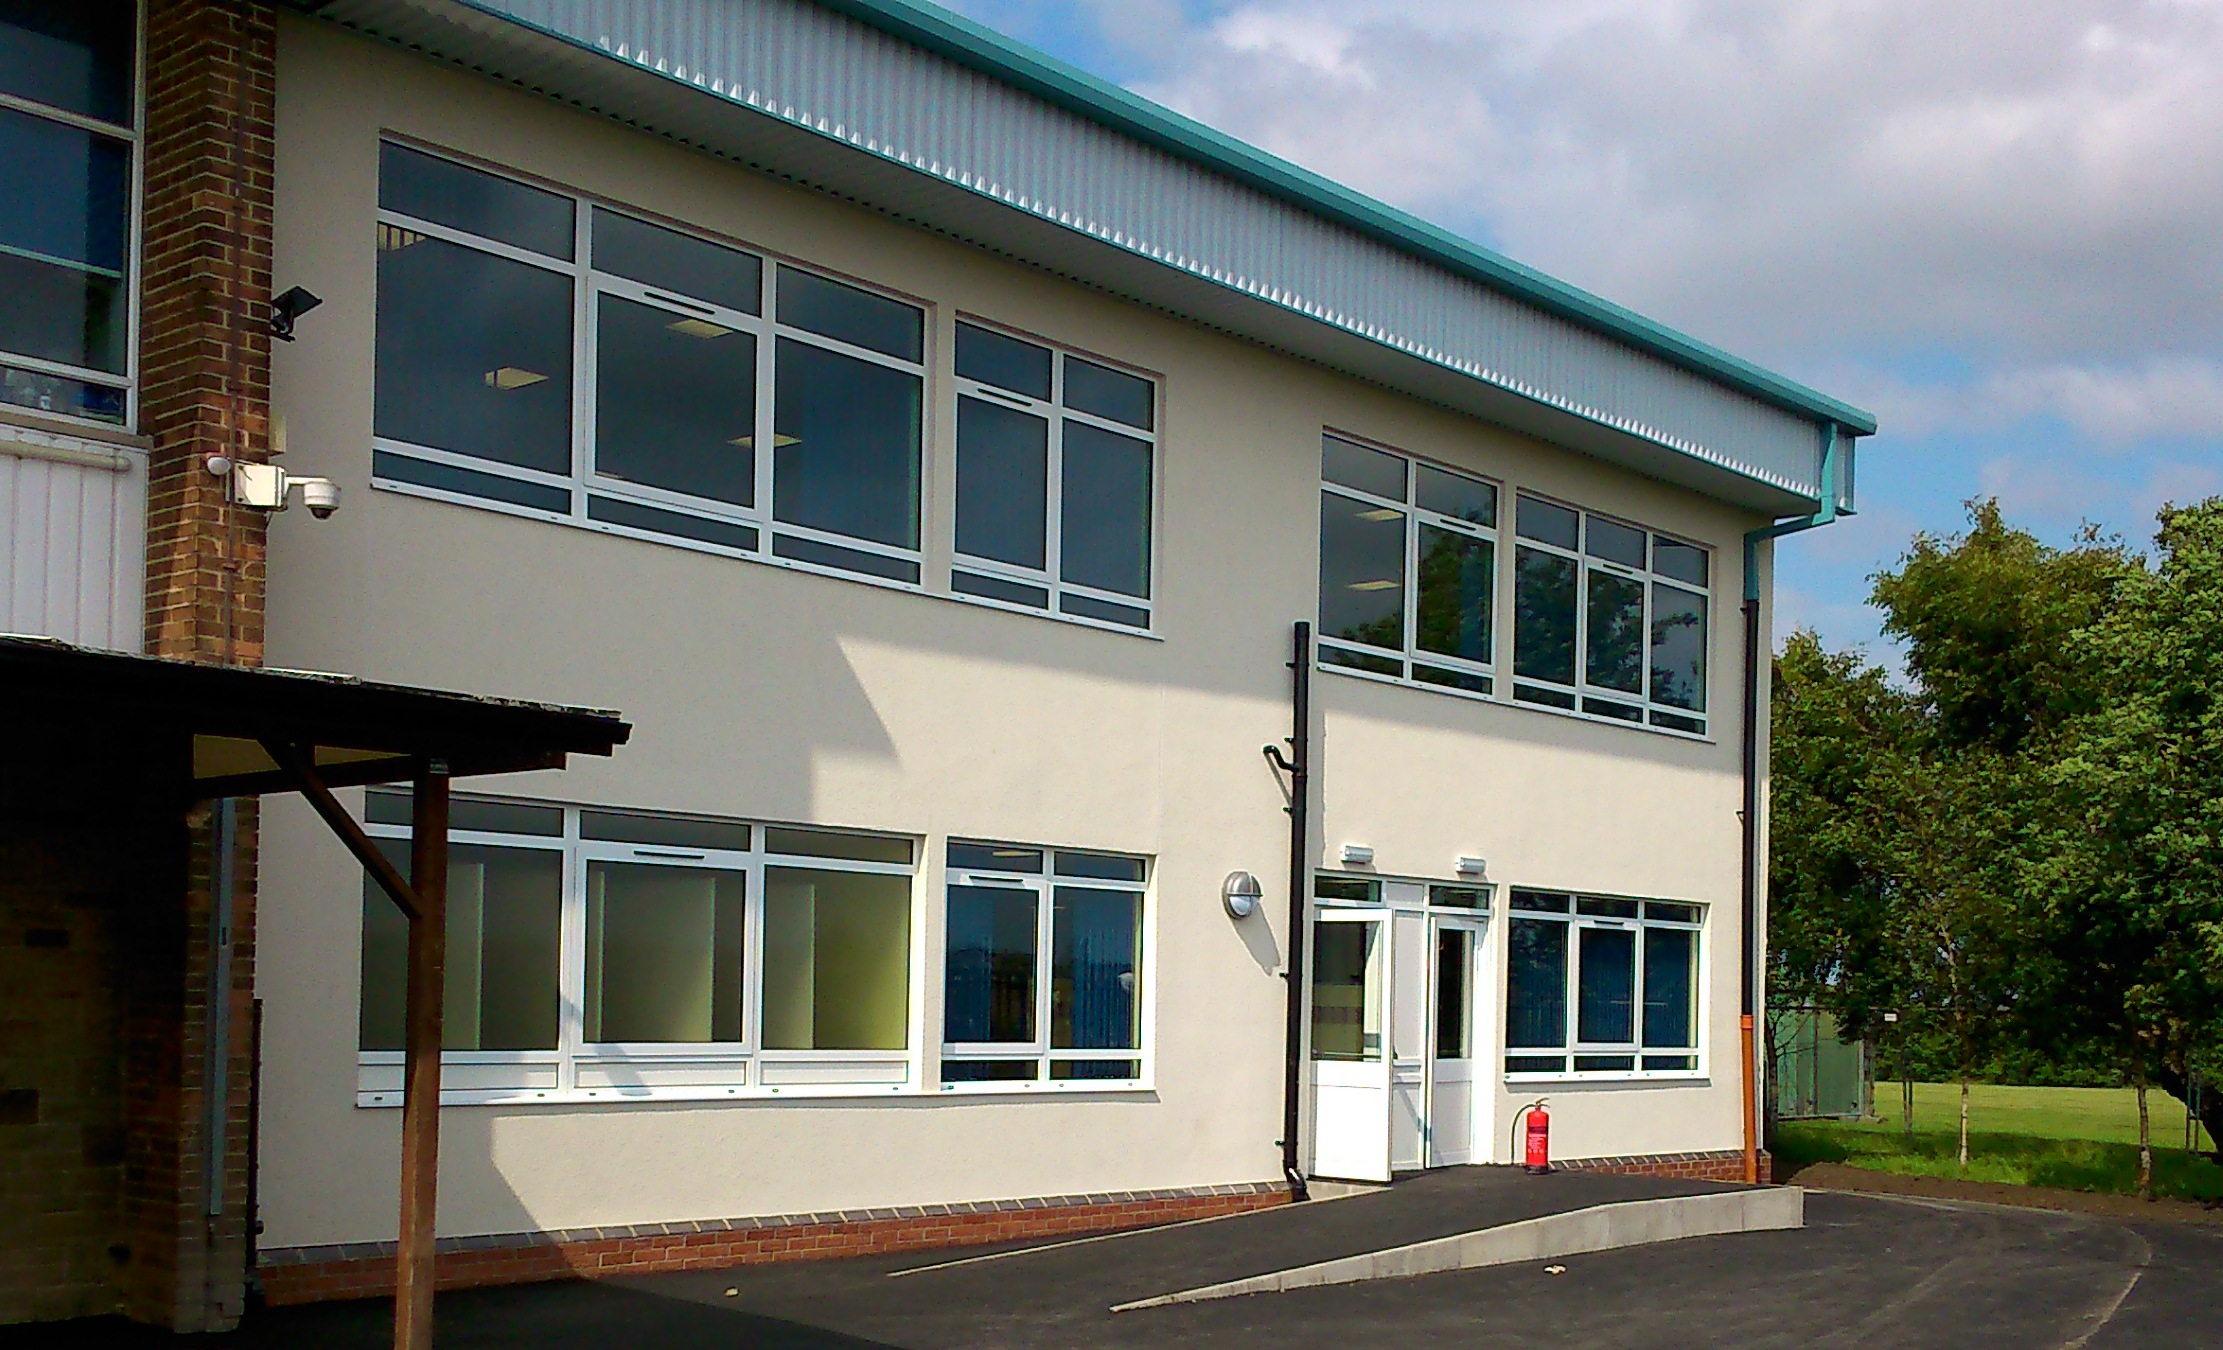 Creationdesign Wales School extension and refurbishment plan